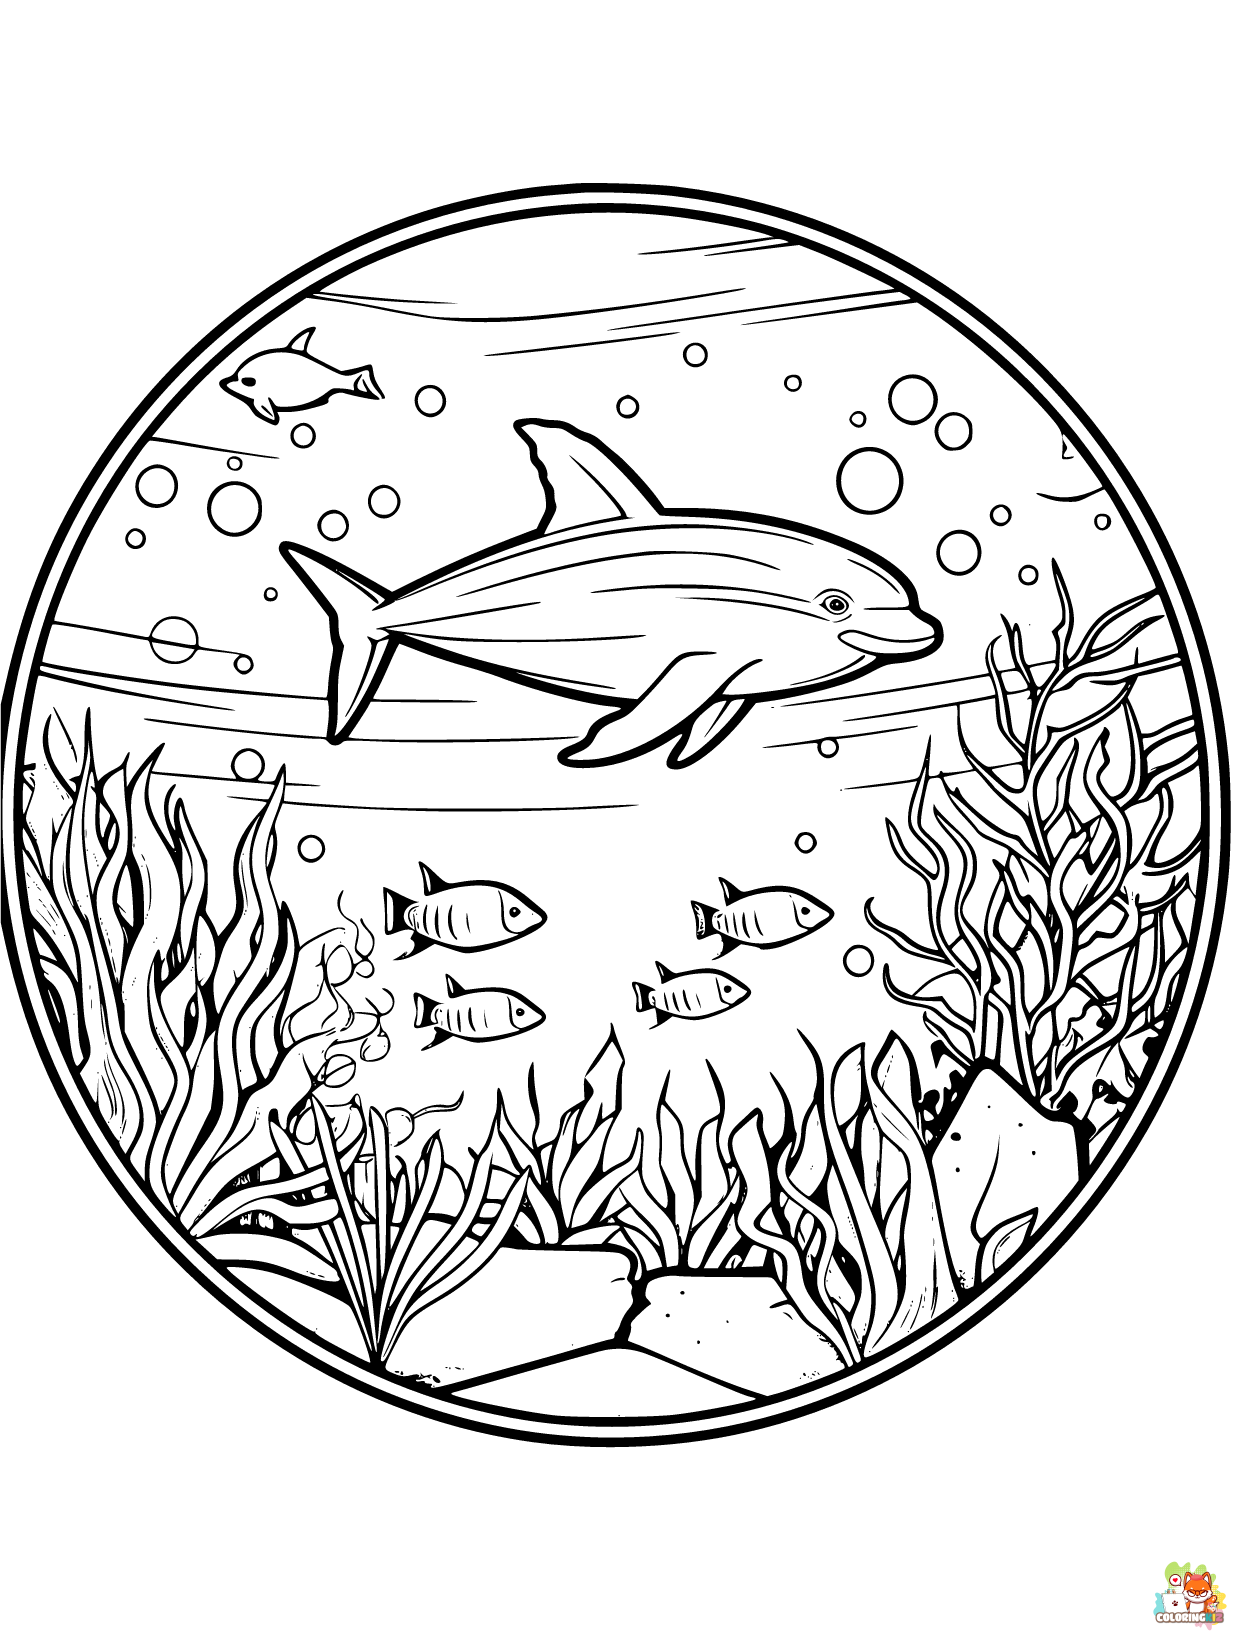 Ocean coloring pages printable